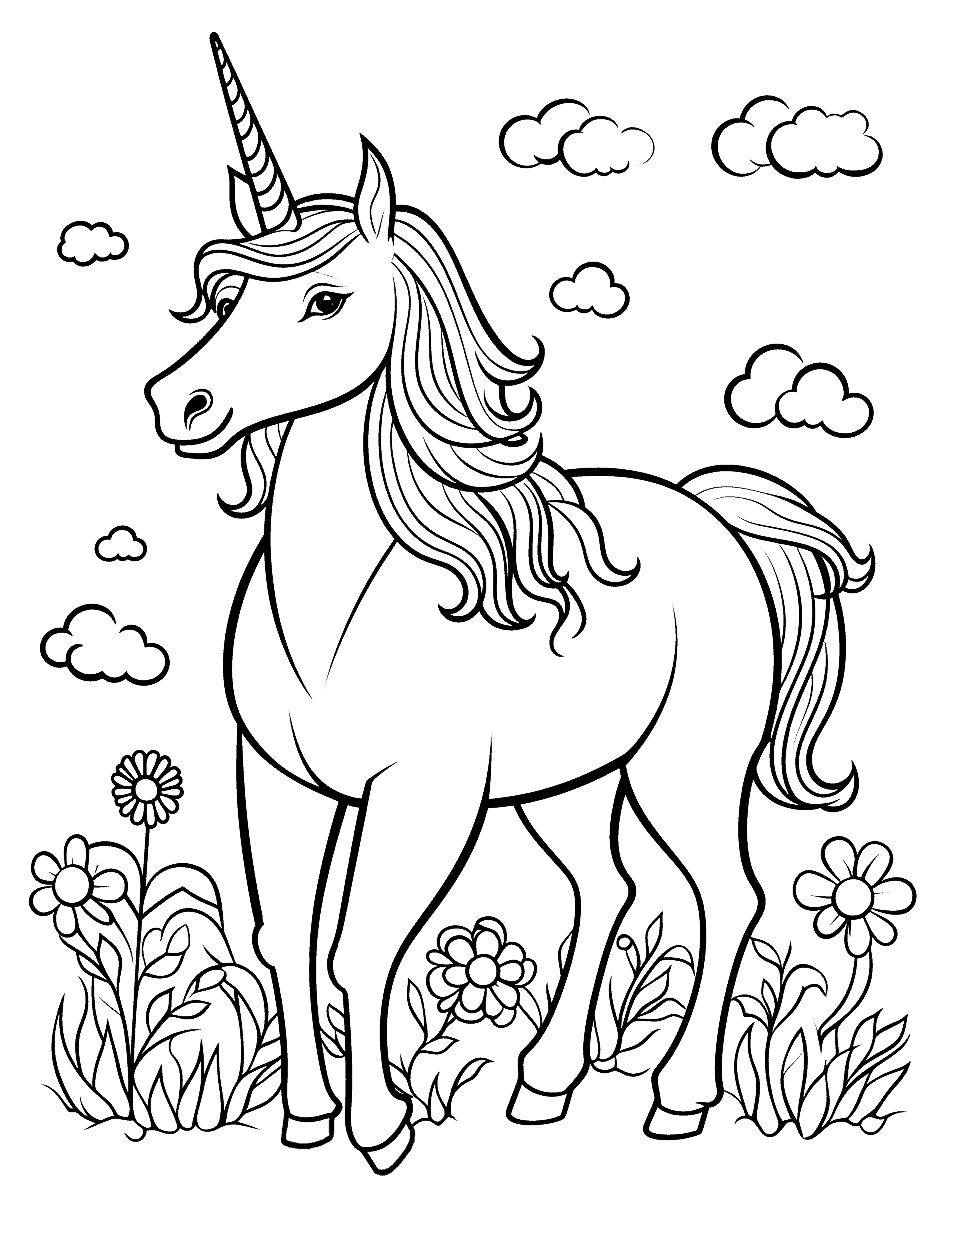 Crayola Unicorn Coloring Page - A vibrant unicorn design ready to be colored in.